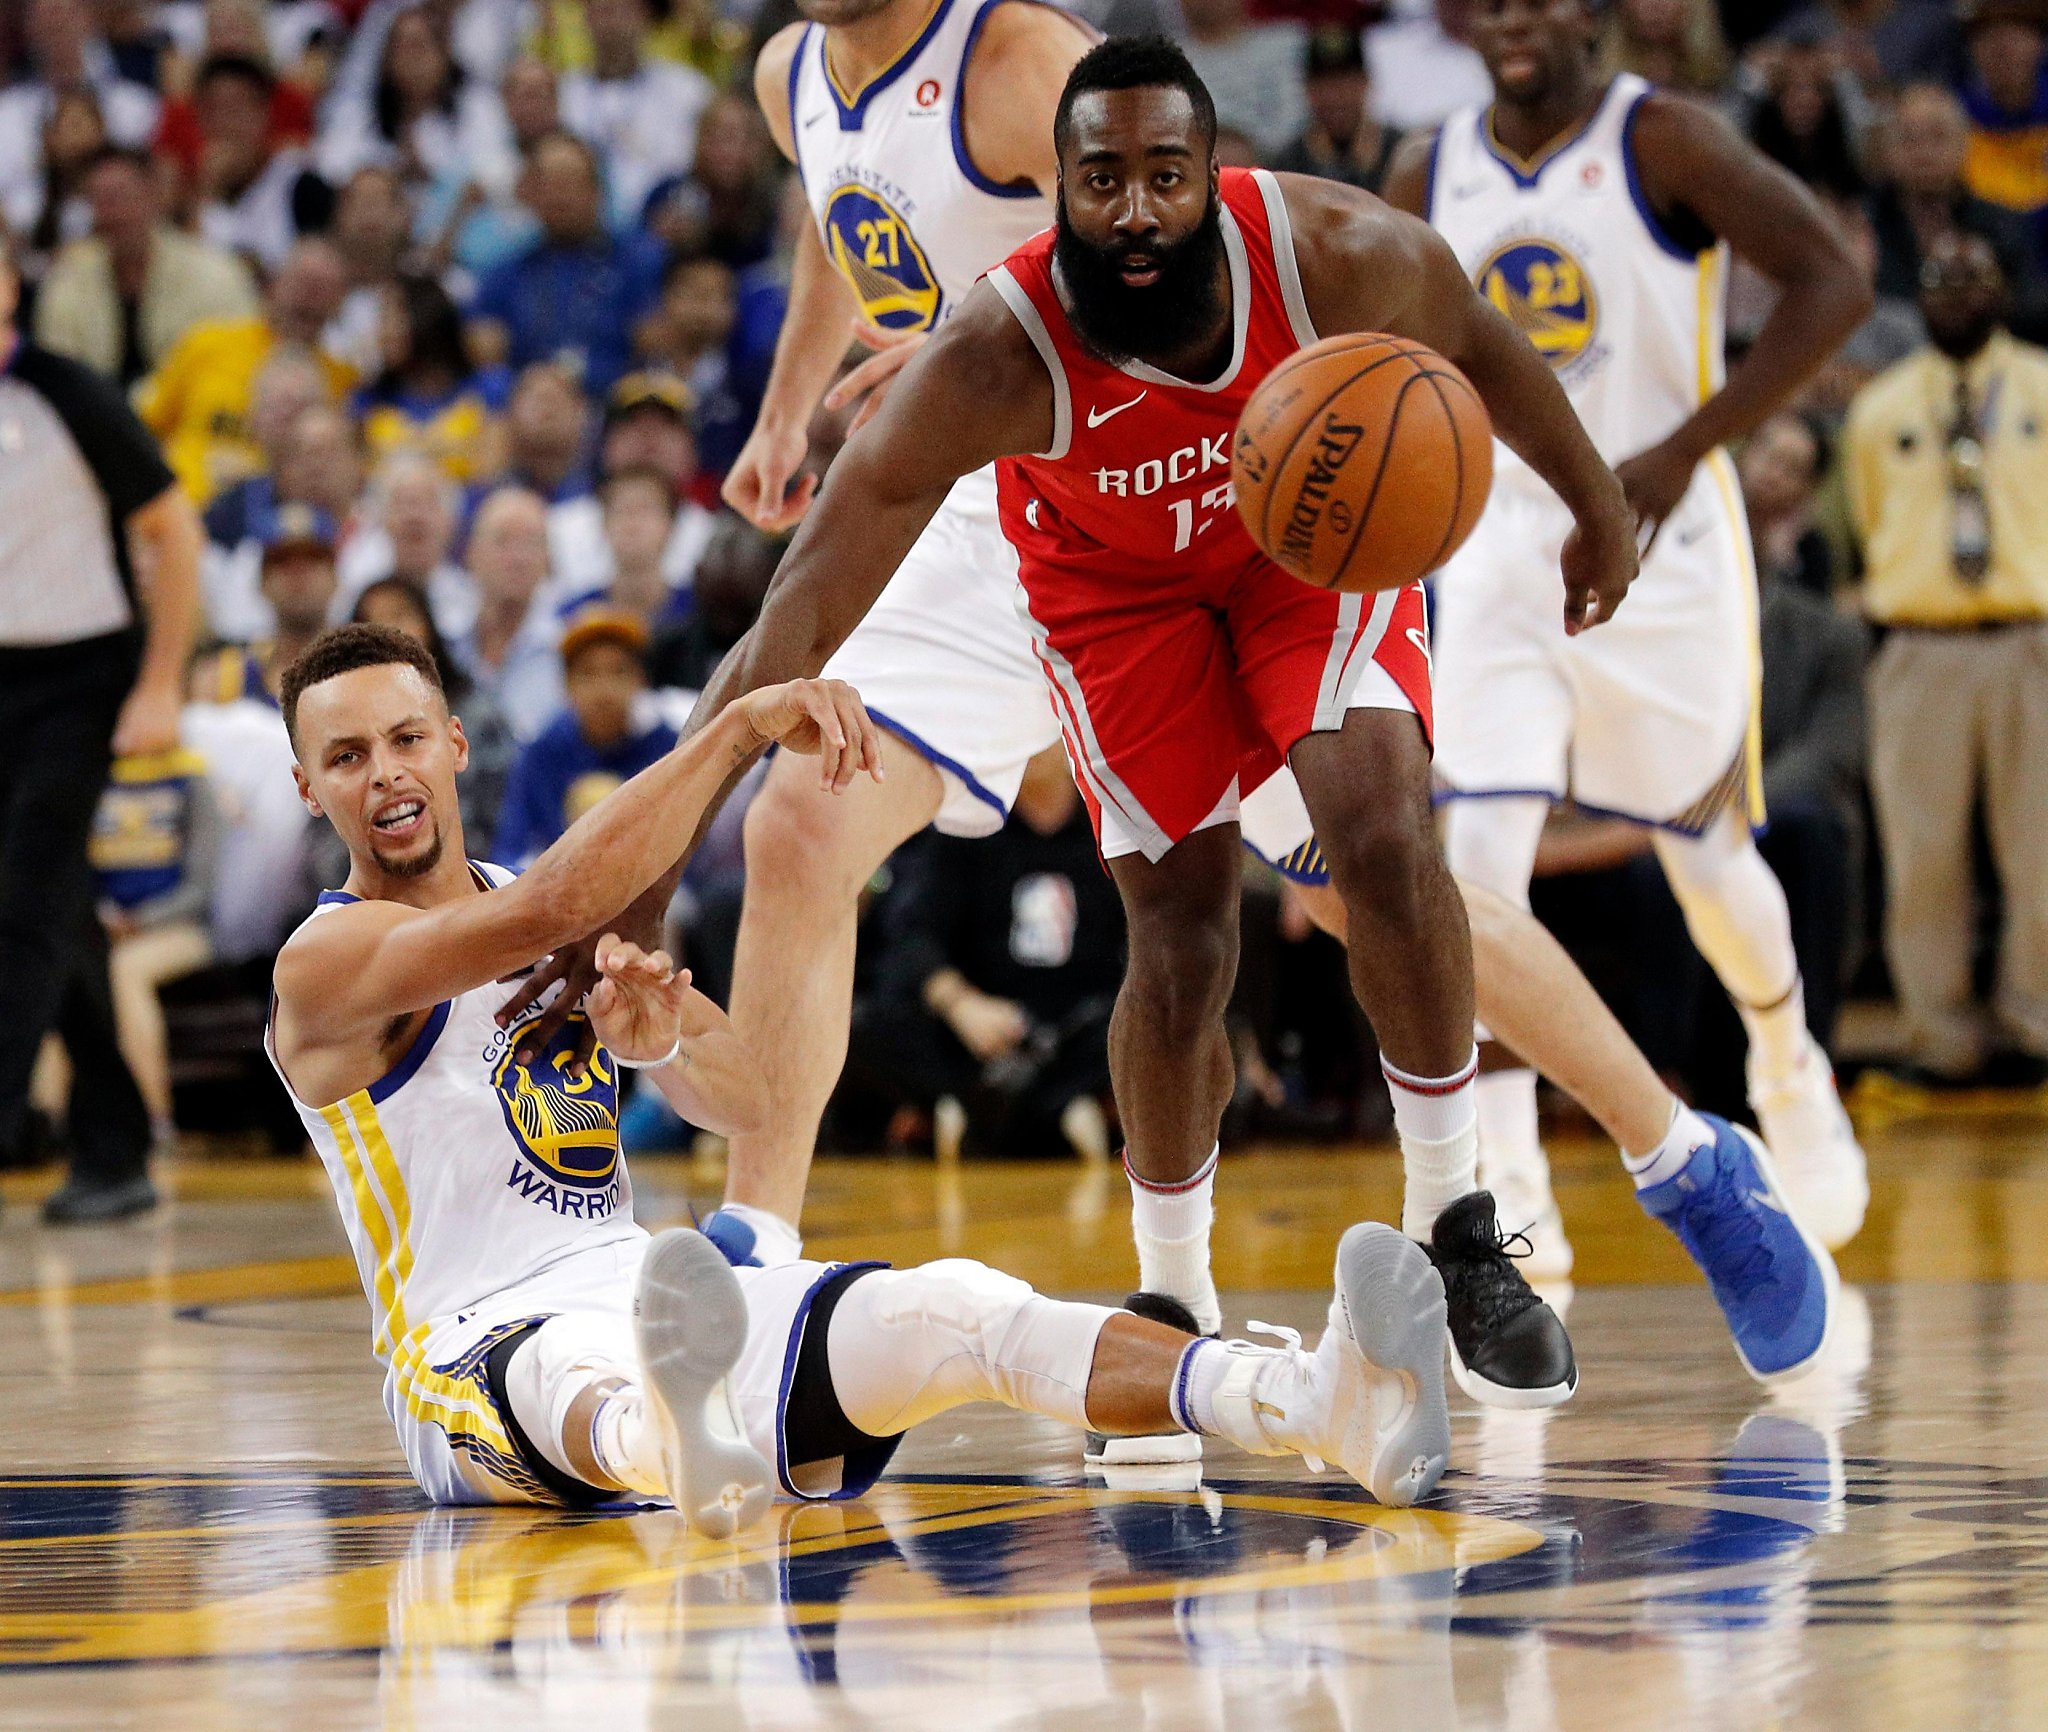 Warriors vs. Rockets is the matchup we’ve waited for